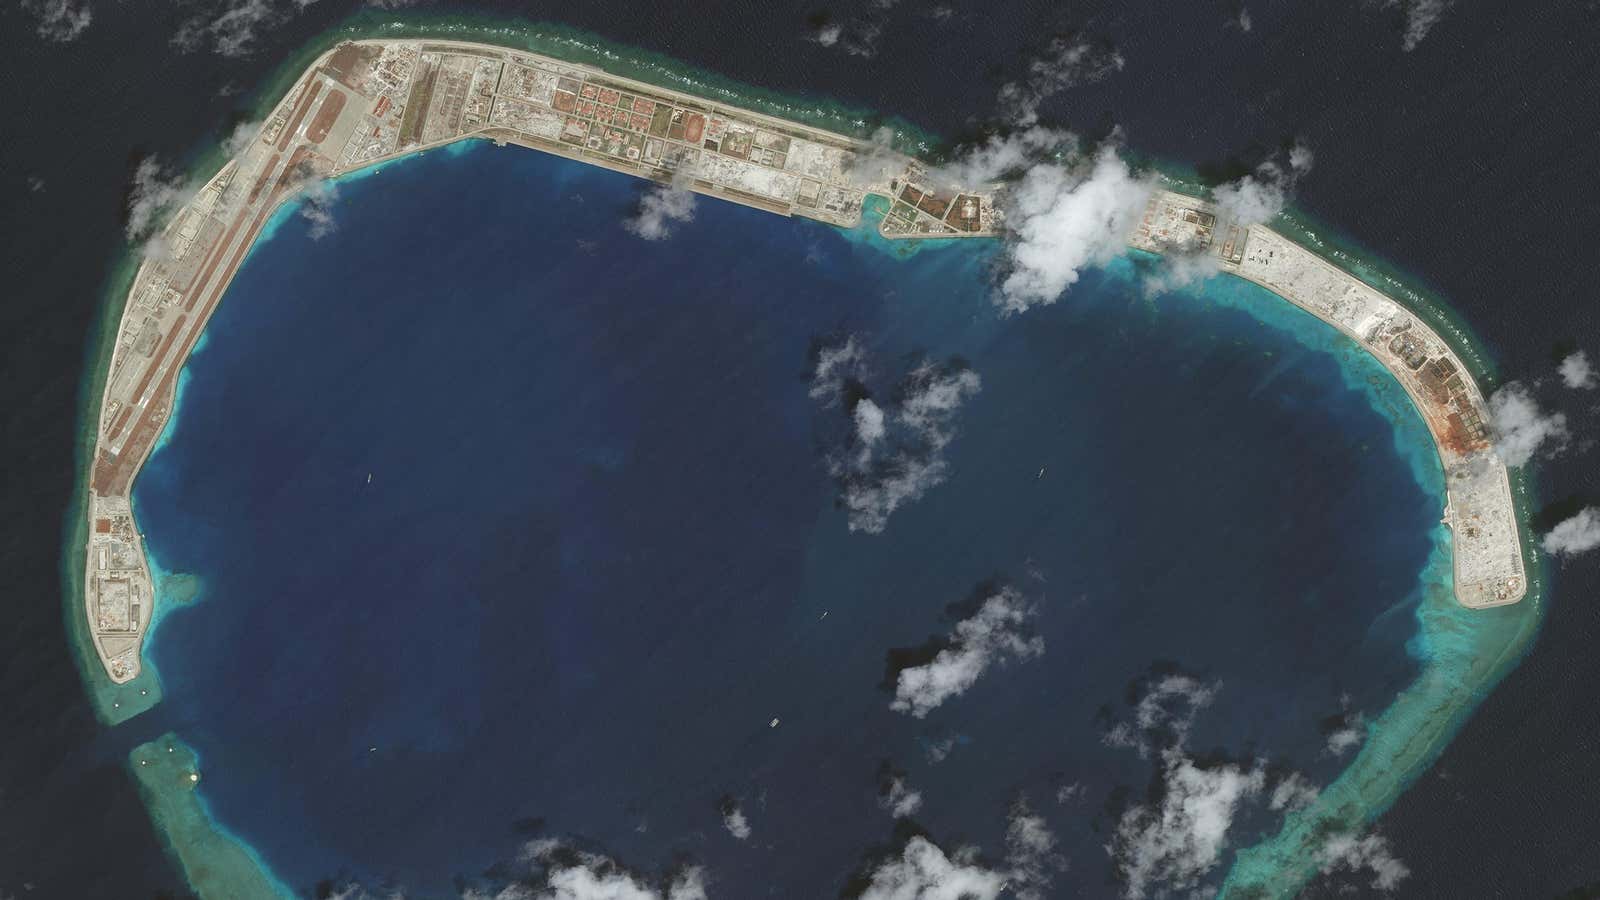 Mischief Reef in the South China Sea, April 2020.